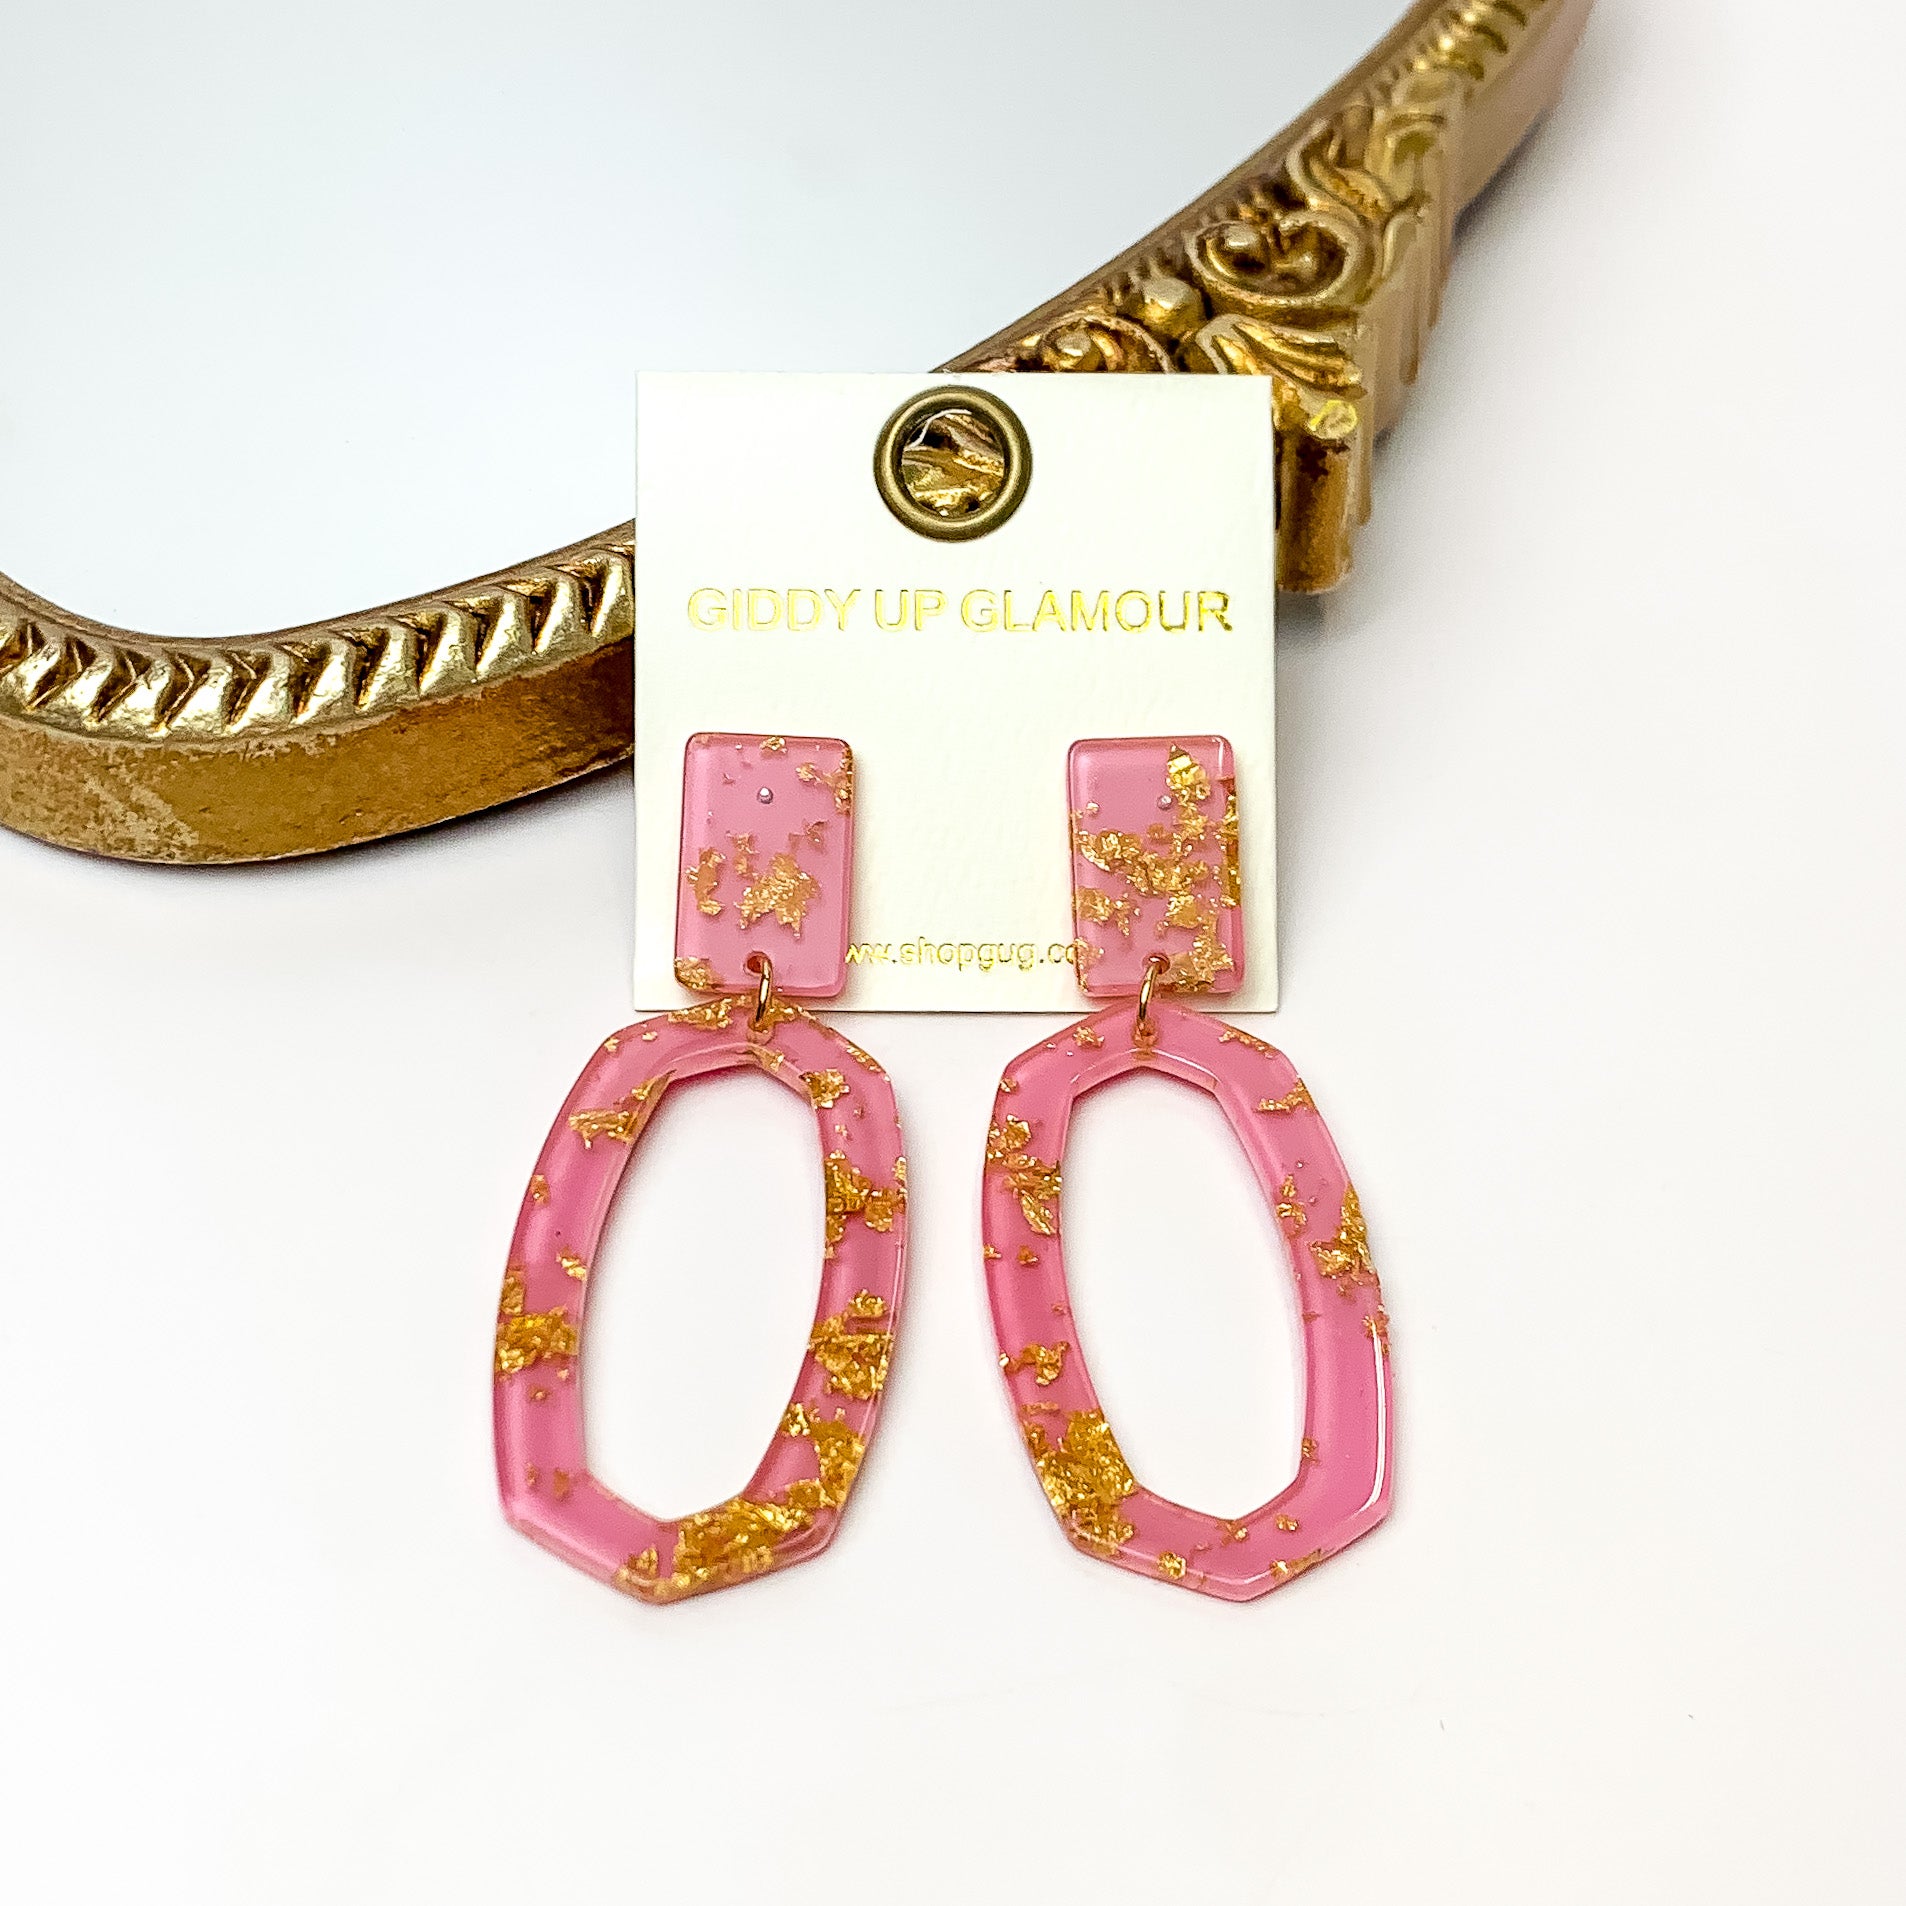 Miami Marble Open Oval Earrings in Pink. Pictured on a white background with the earrings against a gold frame.